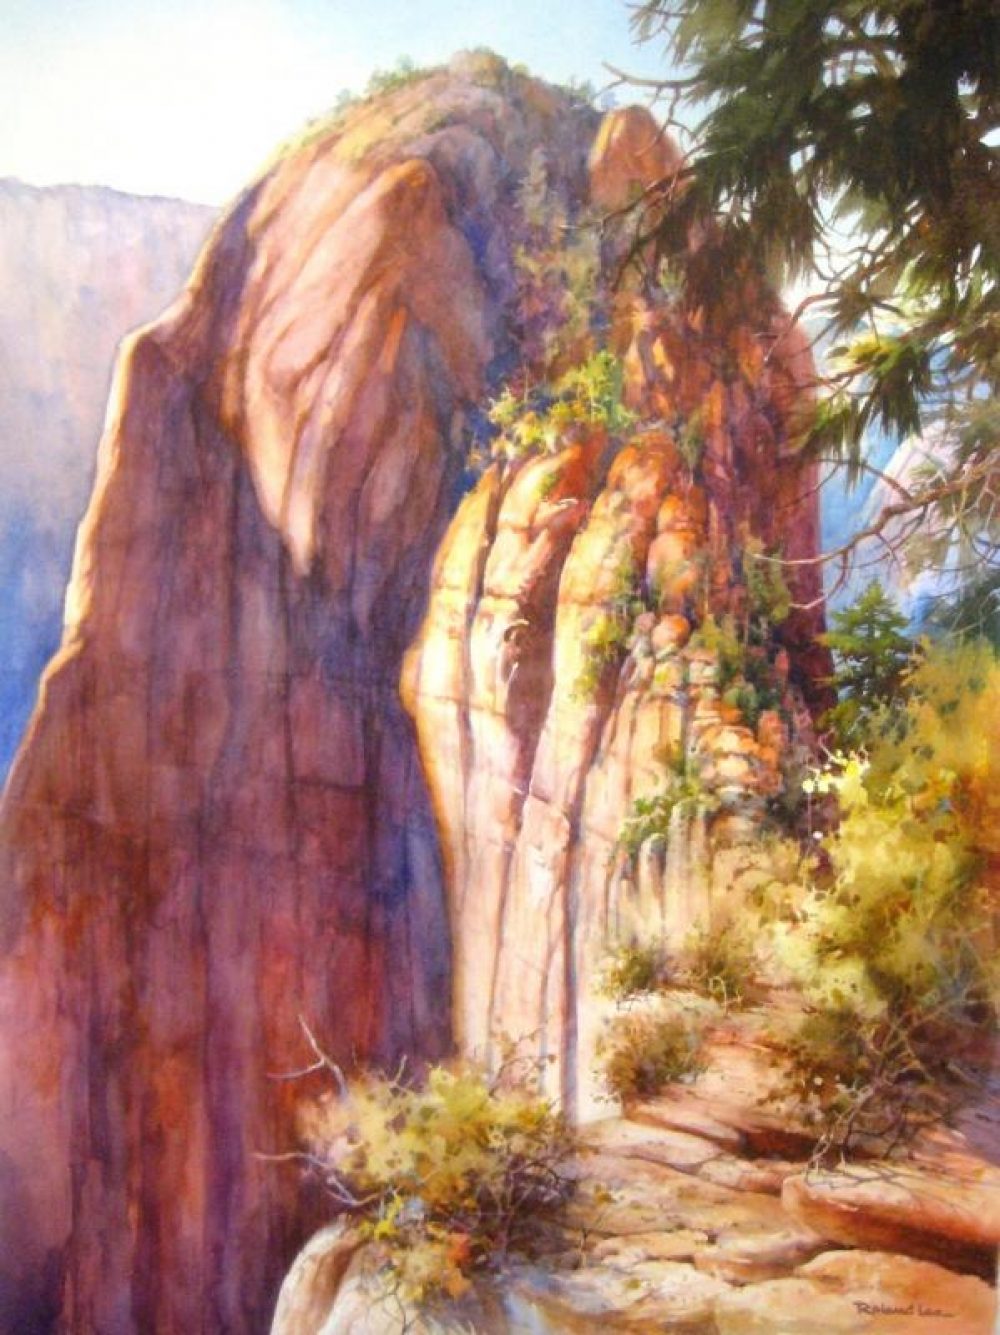 Pathway to the Angels - Giclee Print - Giclee from original painting of Angels Landing in Zion National Park